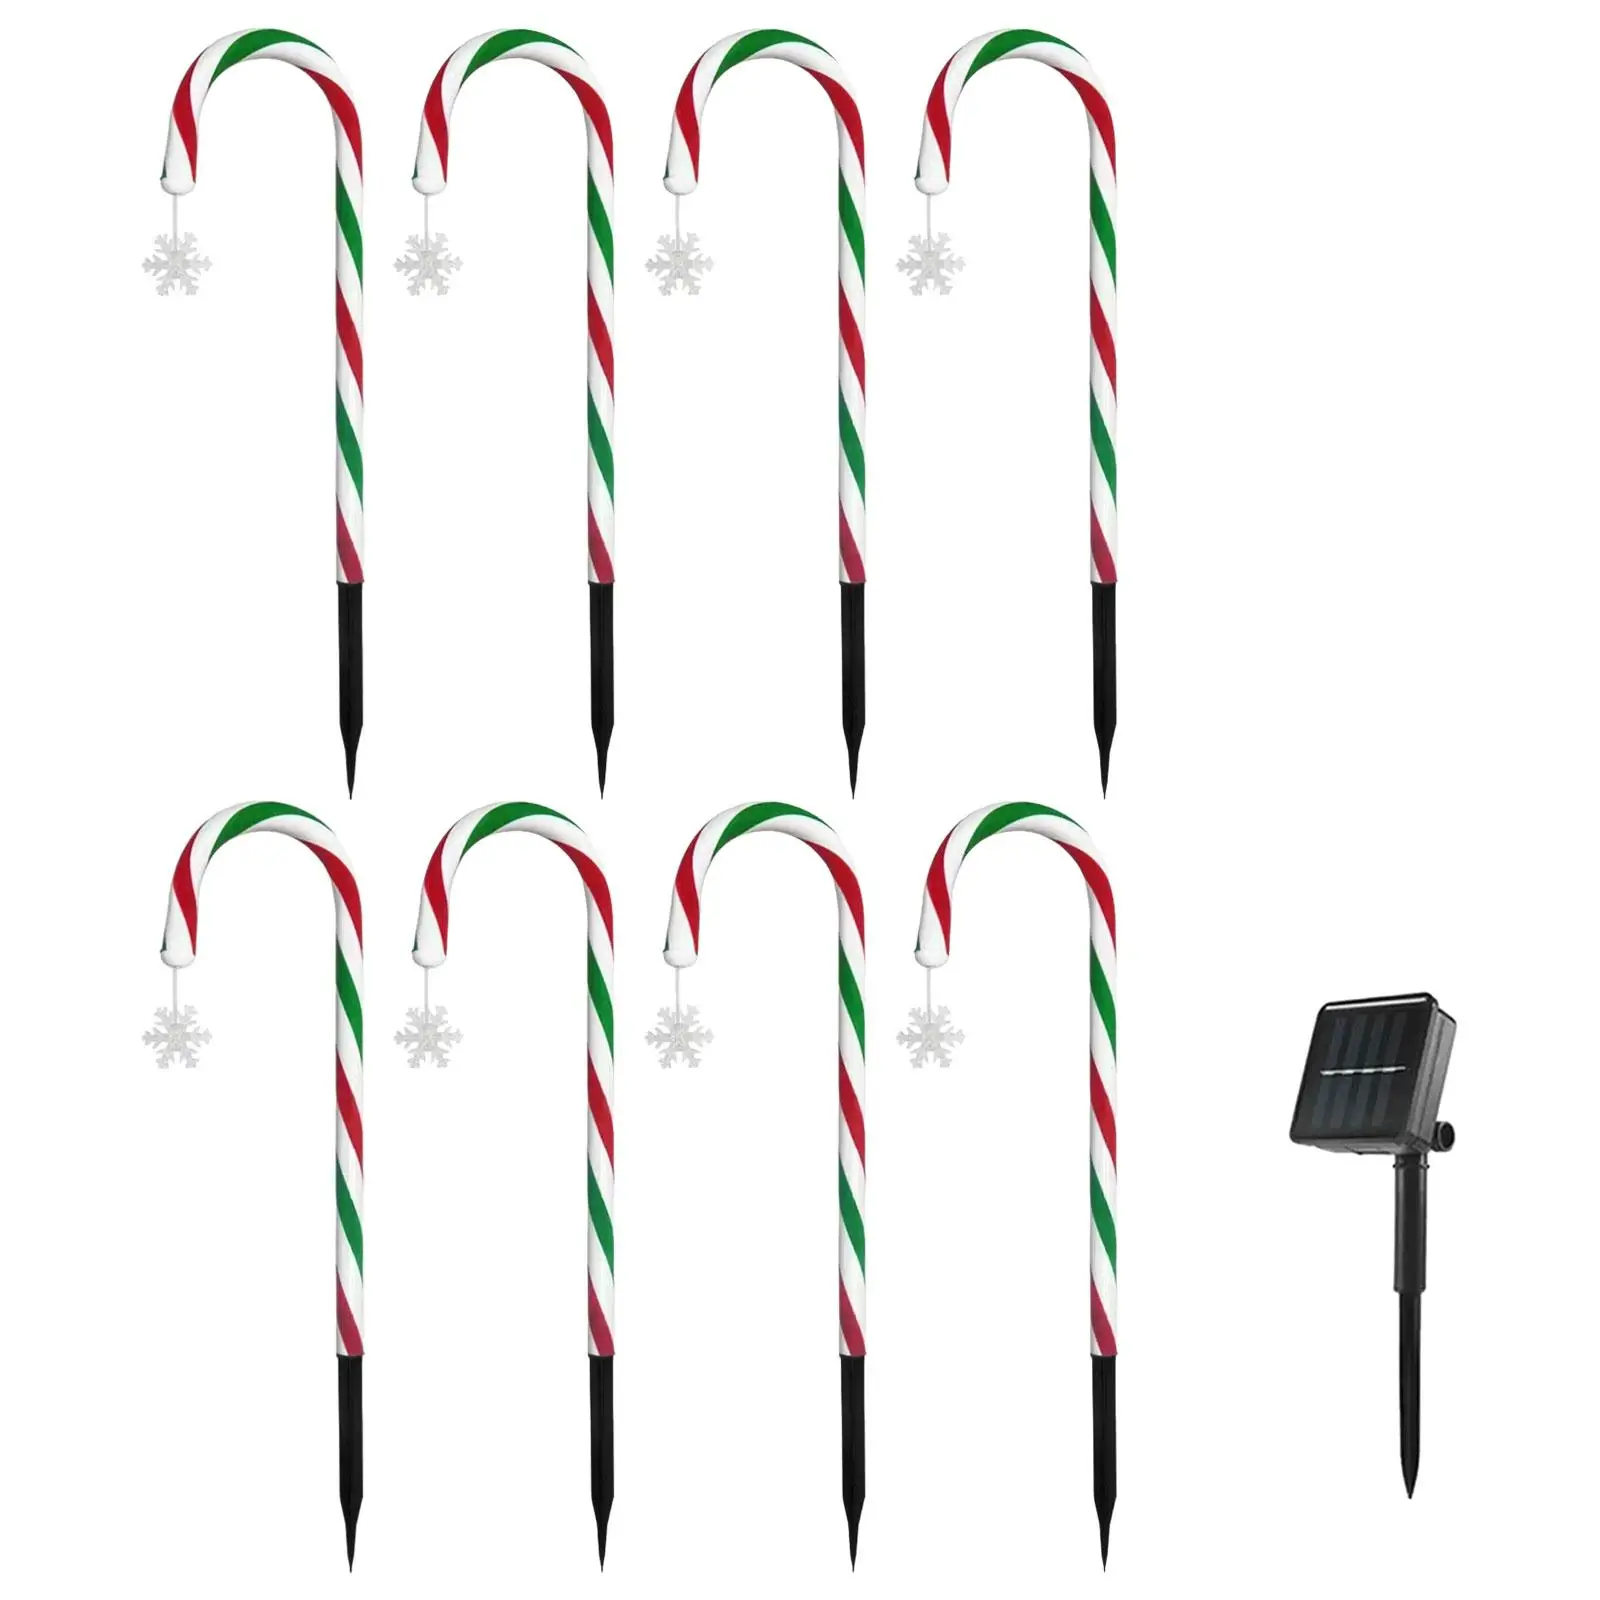 Christmas Solar Candy Cane Lights Xmas Decorative Lights for Lawn Yard Porch